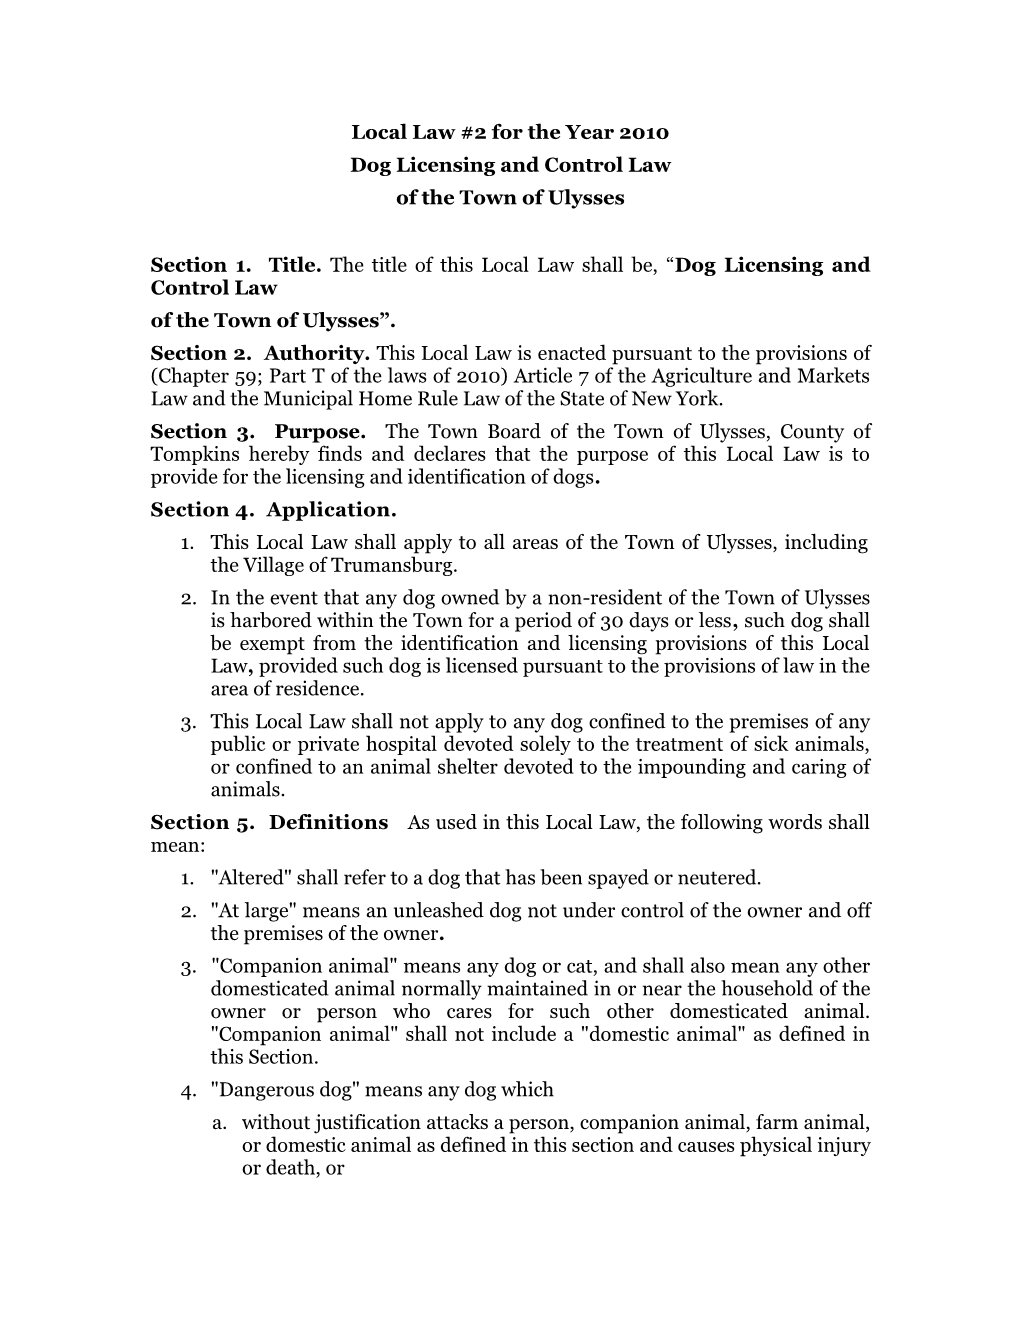 Local Law #2 for the Year 2010 Dog Licensing and Control Law of the Town of Ulysses